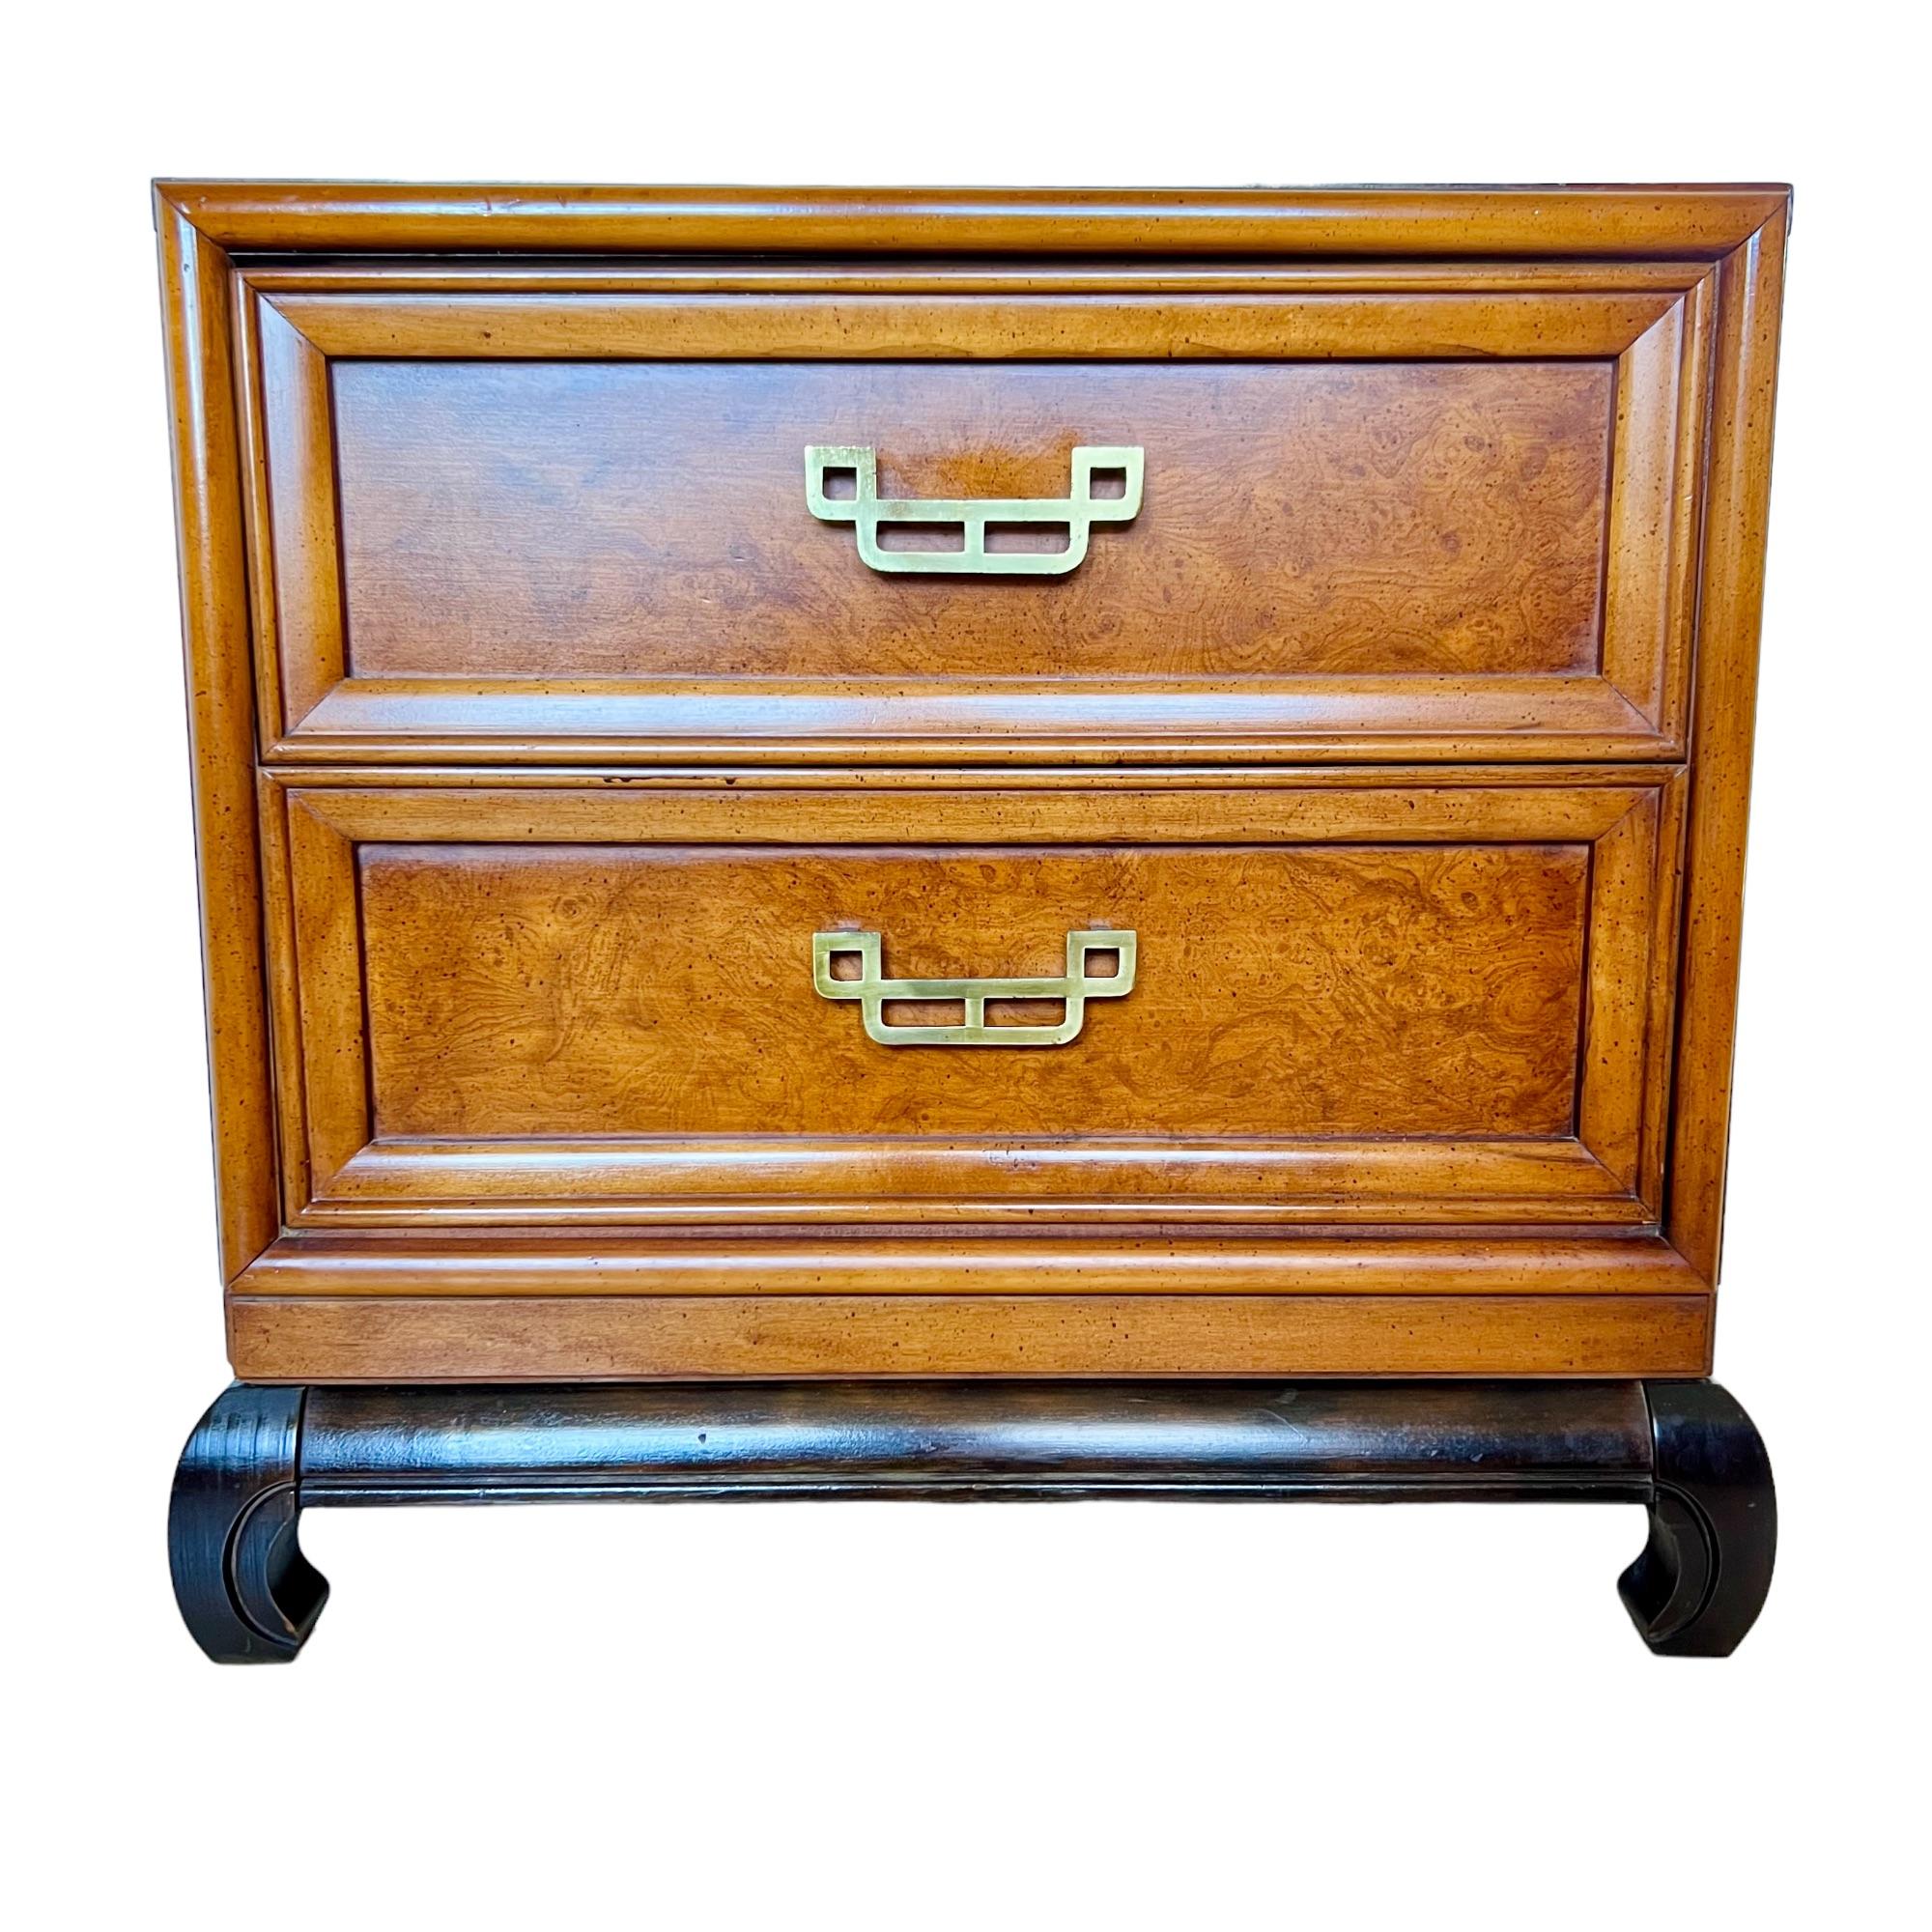 A vintage Hollywood Regency style Henry Link Mandarin collection two drawer nightstand or commode. Chinoiserie design featuring burl wood drawer faces, open fretwork brass handles and a rosewood Ming style chow foot platform